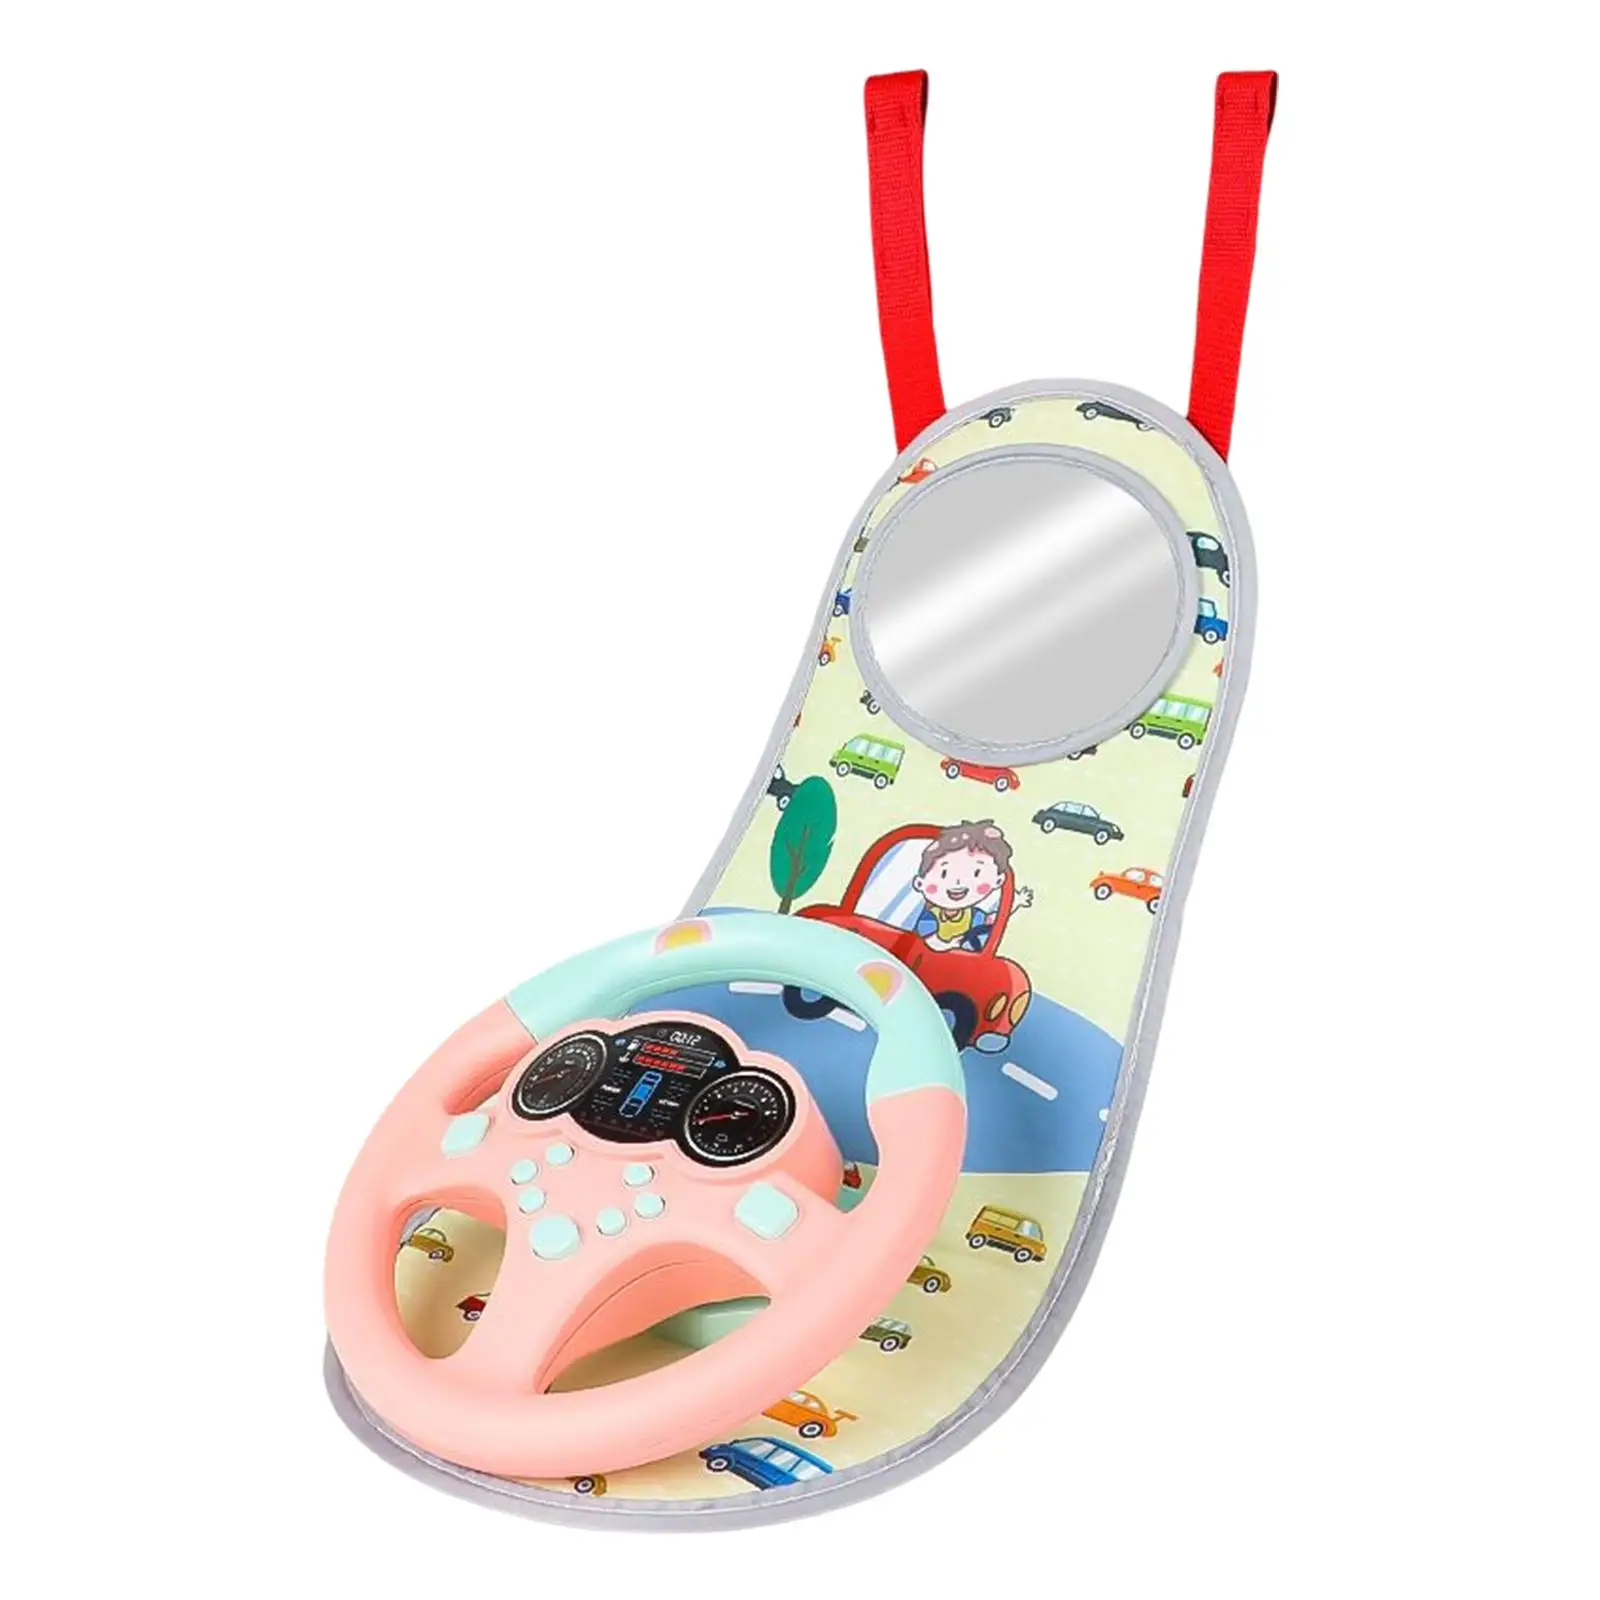 Simulation Car Seat Toys with Mirror and Driving Sounds for Toddlers